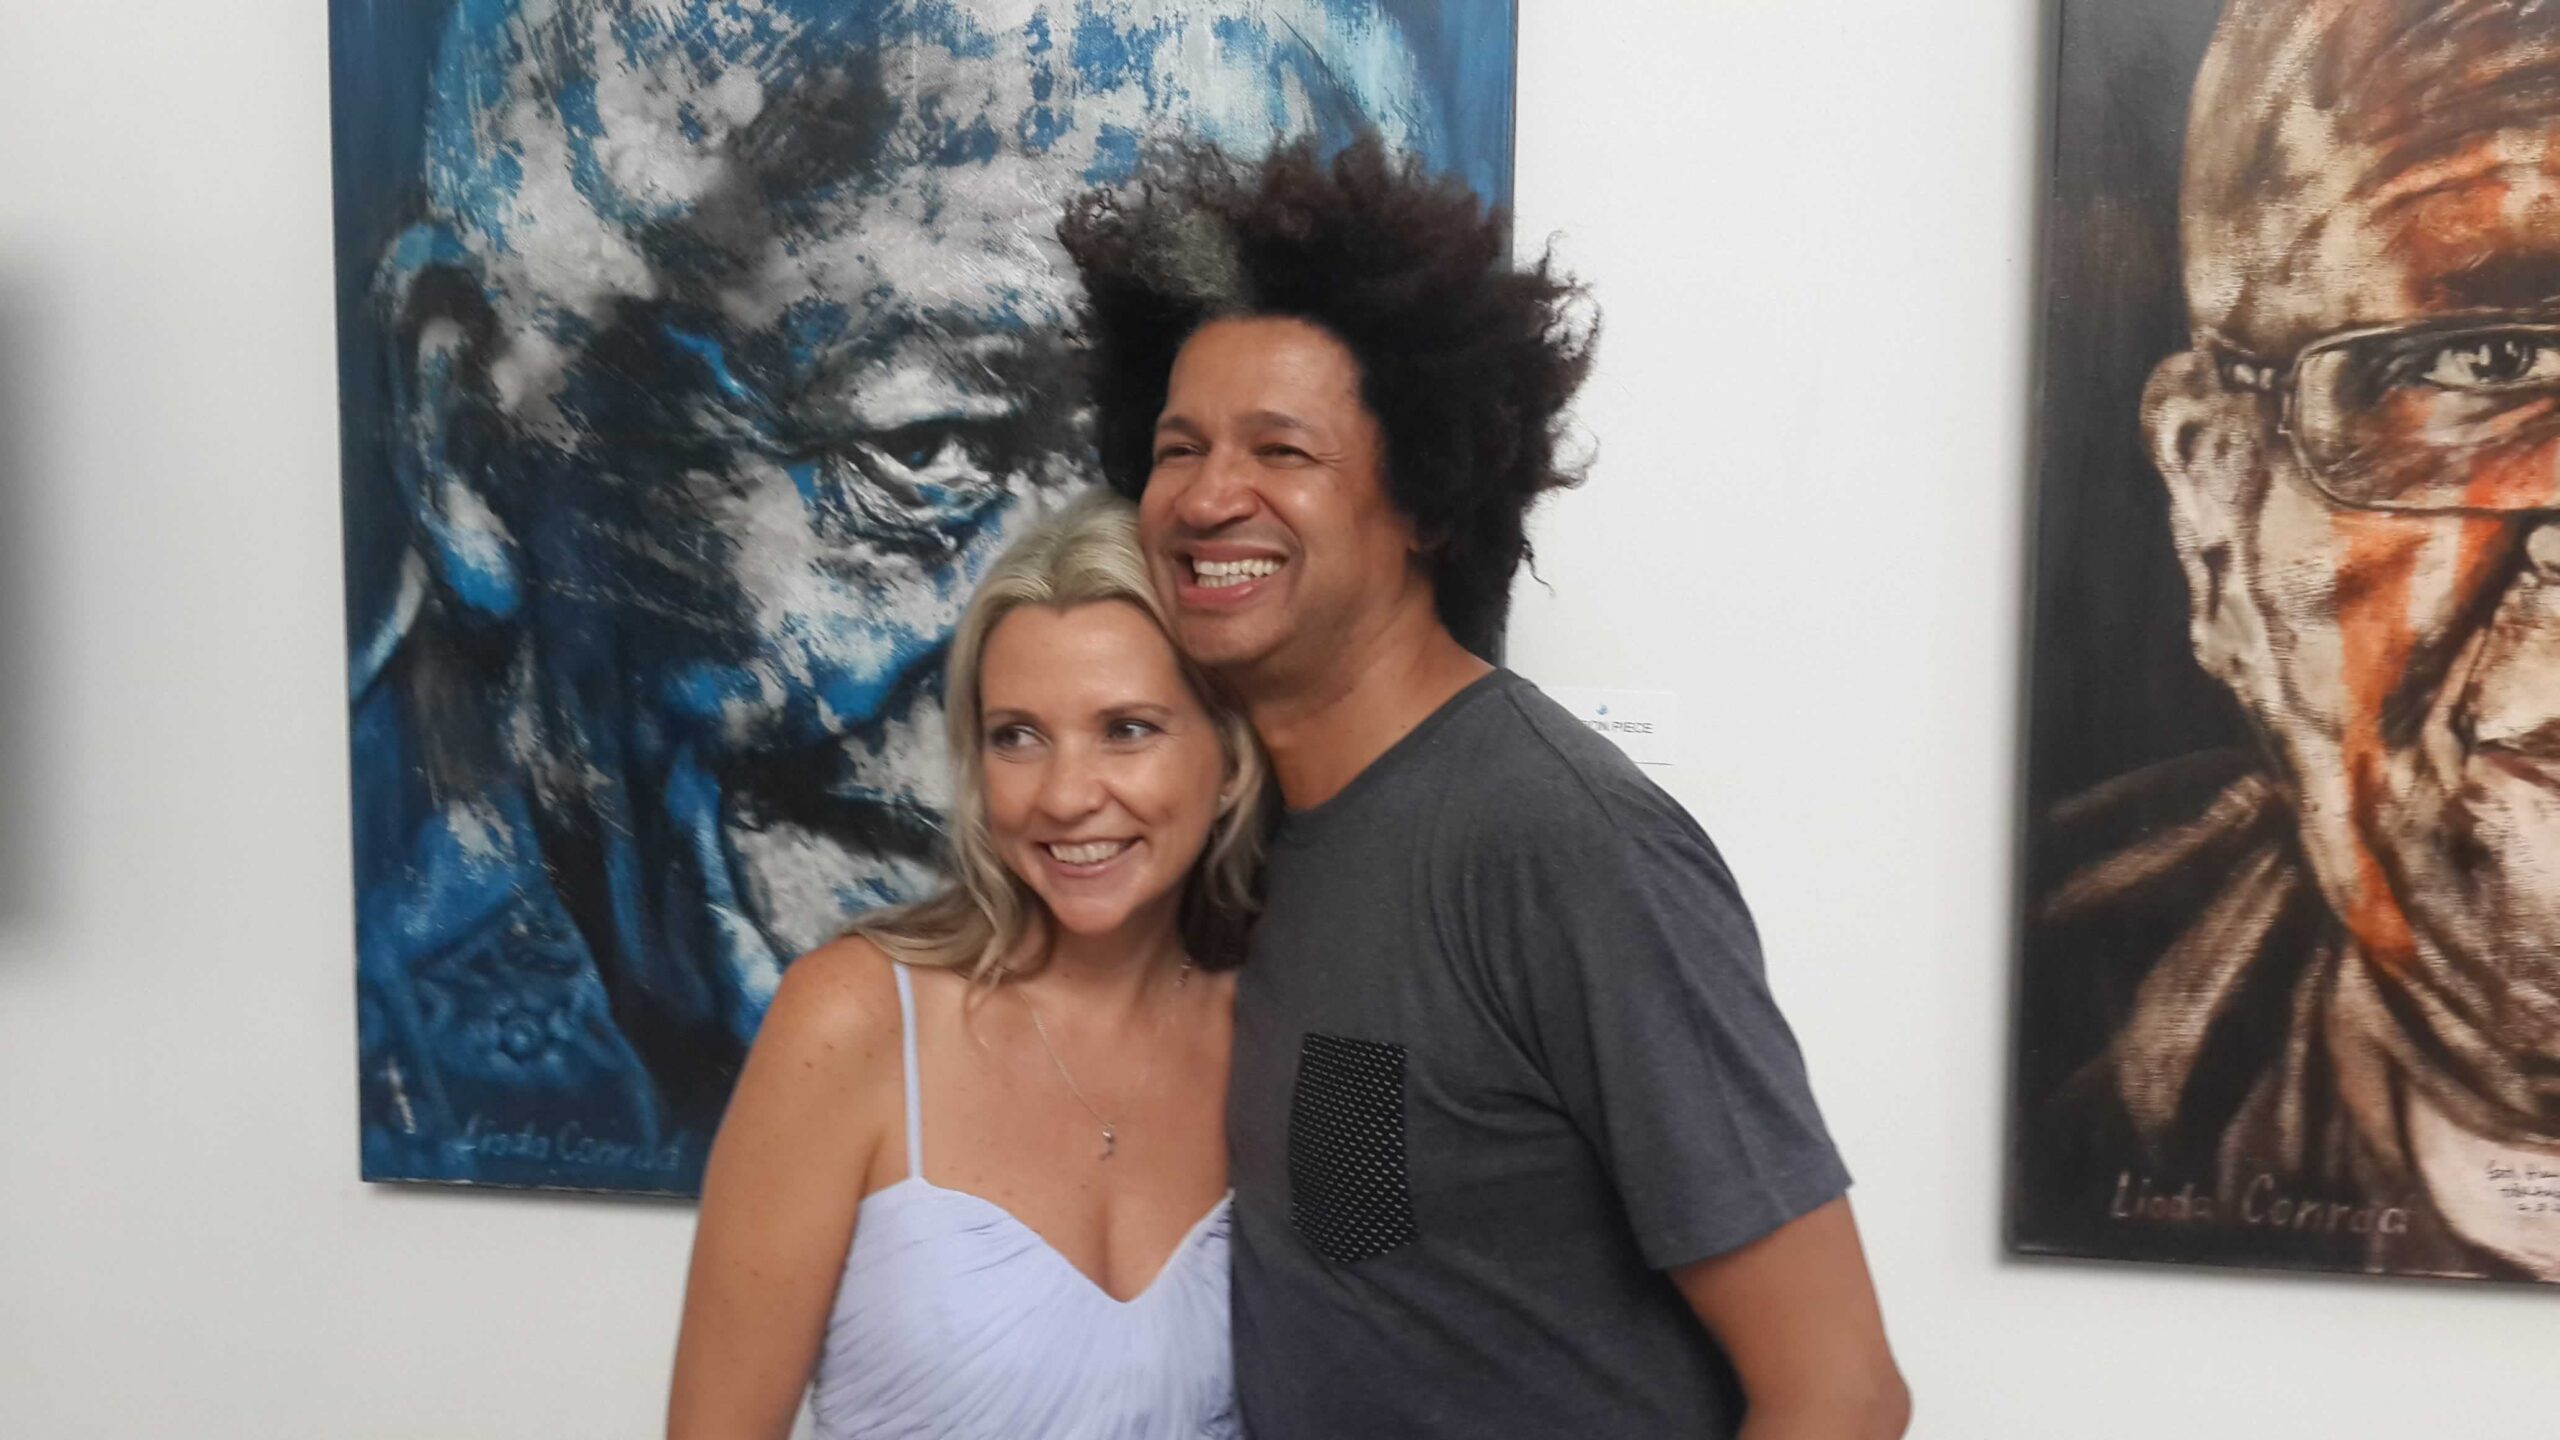 Stephanie with Mark Lottering with a painting behind them